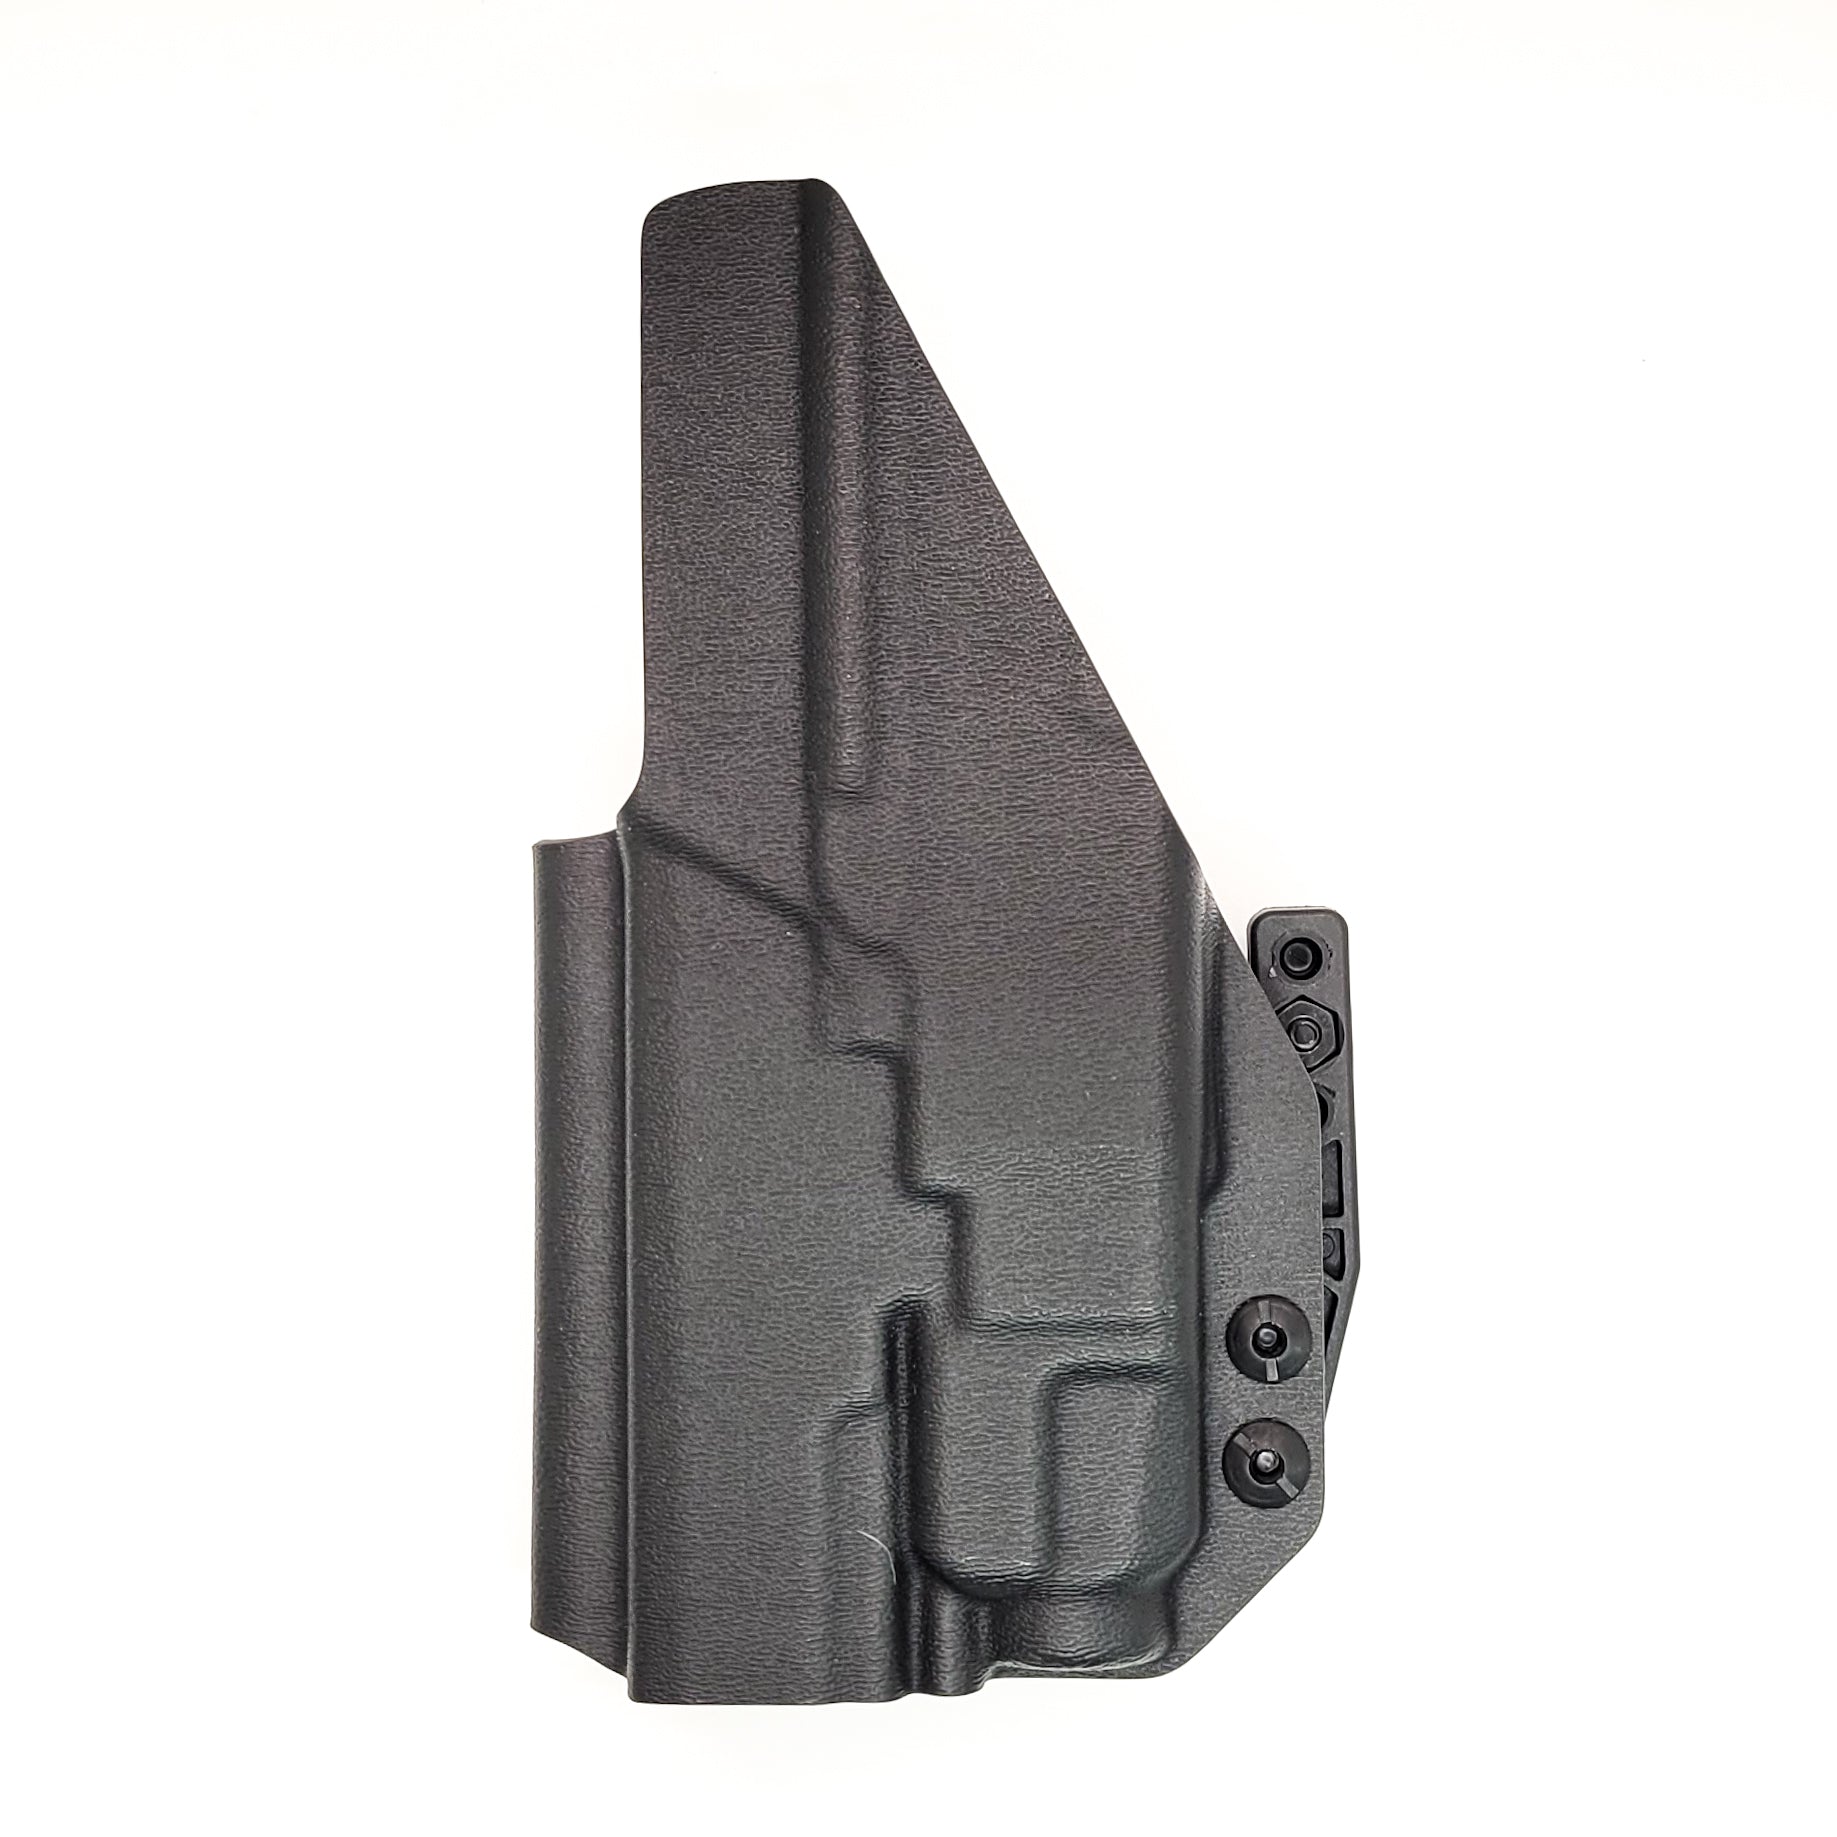 For the best concealed carry Inside Waistband IWB AIWB Holster designed to fit the Walther PDP F Series 4" & 3.5" pistols with Streamlight TLR-7A or TLR-7 on the firearm, shop Four Brothers Holsters. Cut for red dot sight, full sweat guard, adjustable retention & open muzzle for threaded barrels & compensators. PDPF TLR7